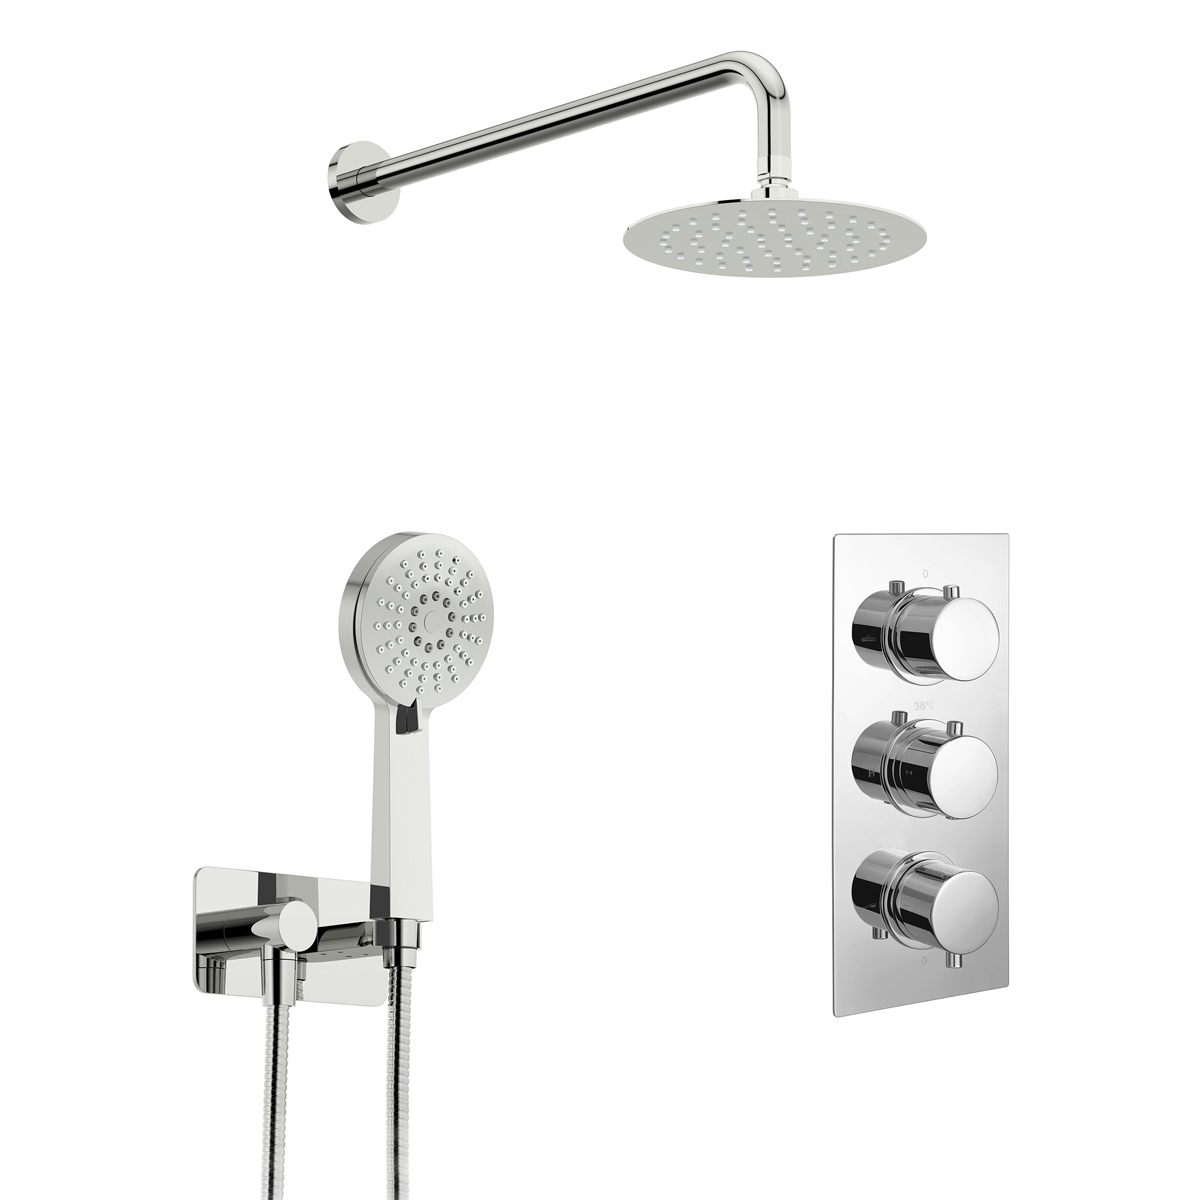 Kirke Curve concealed thermostatic mixer shower with wall arm and handset 300mm shower head